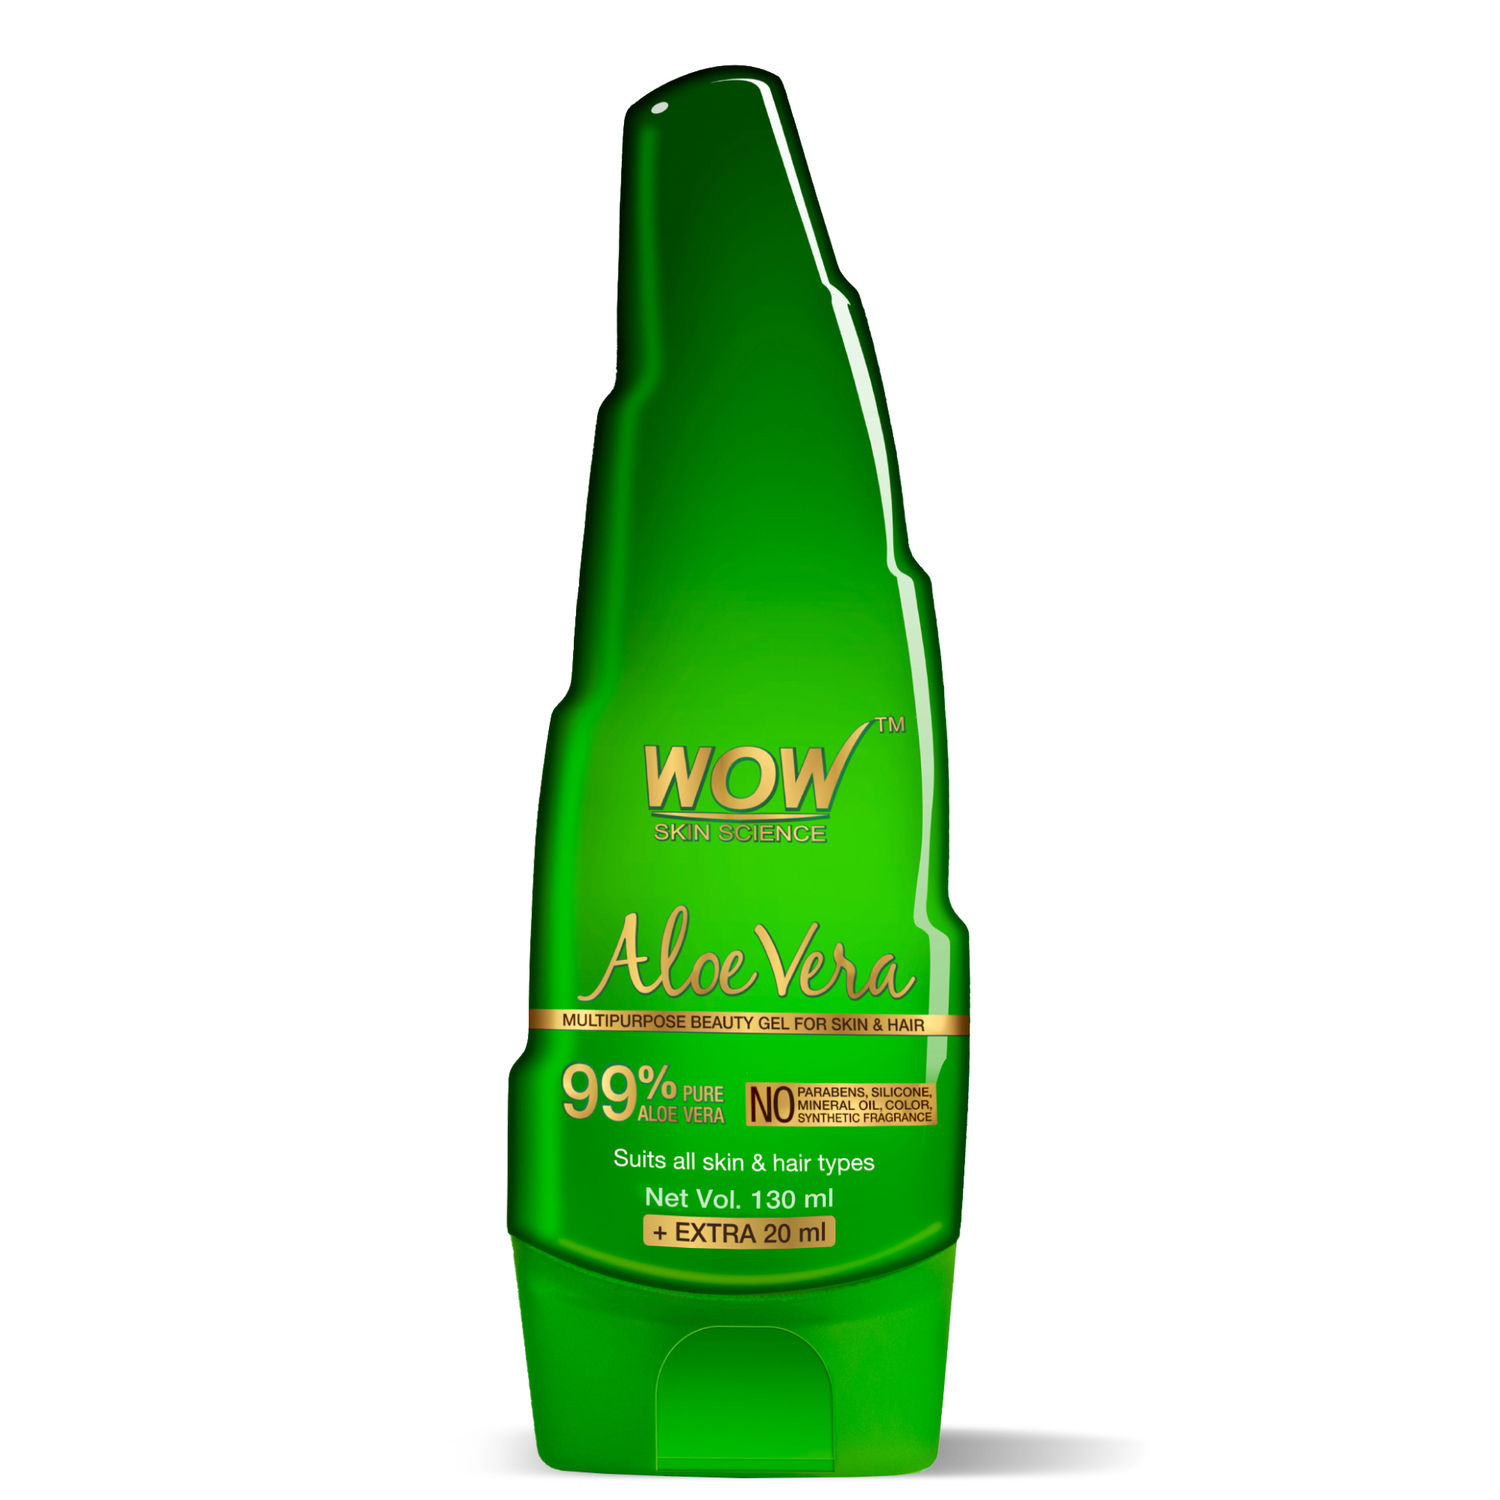 WOW Skin Science Aloe Vera Gel for Face, Skin and Hair - for Both Men and Women ( NO Parabens, Mineral Oils, Silicones, Color & Synthetic Fragrances ) - 130ml